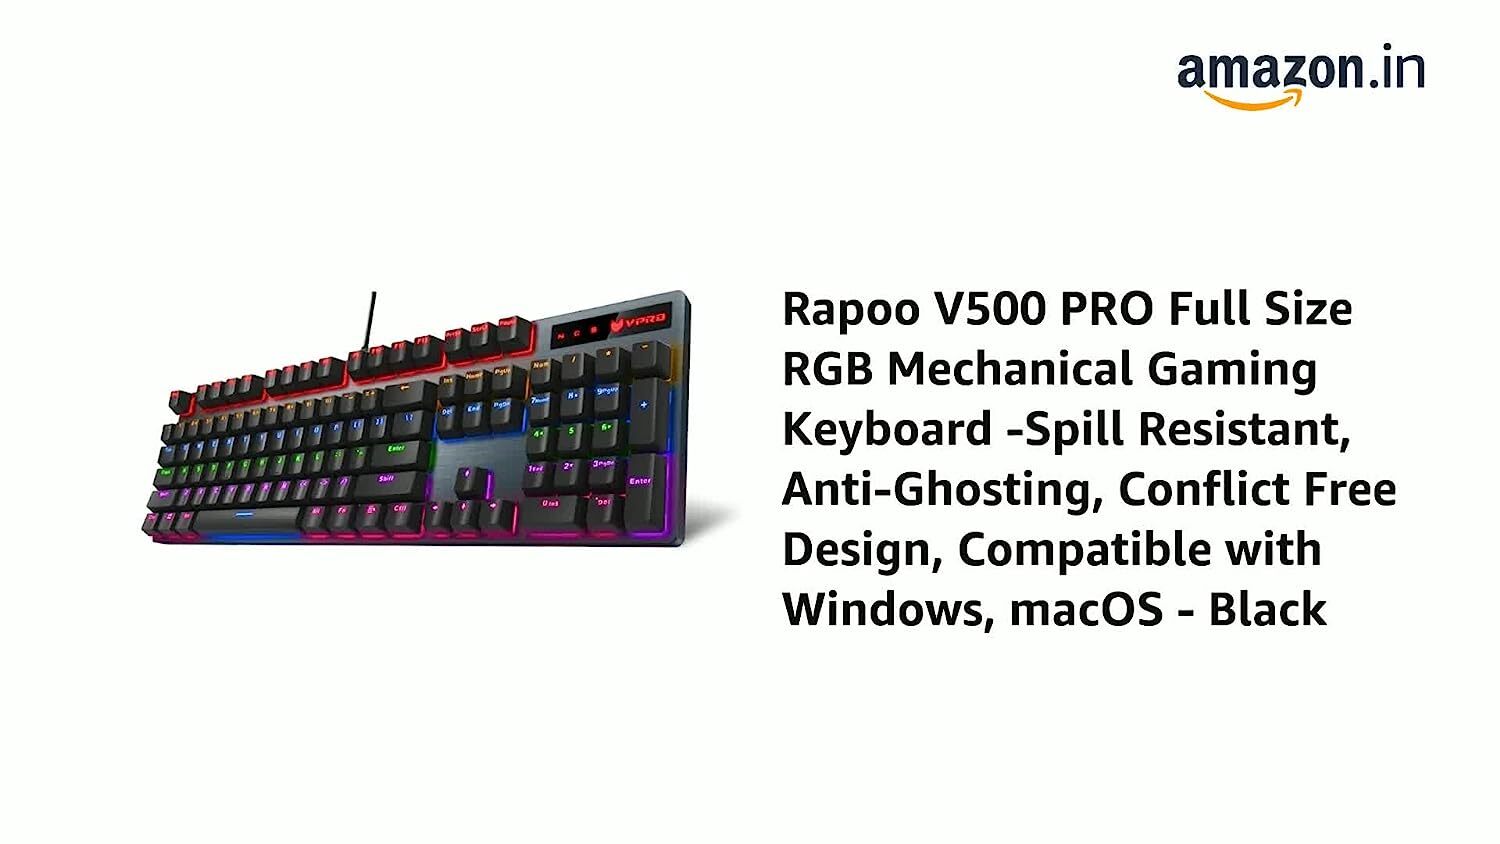 Rapoo V500 PRO Full Size RGB Mechanical Gaming Keyboard -Spill Resistant, Anti-Ghosting, Conflict Free Design, Compatible with Windows, macOS - Black